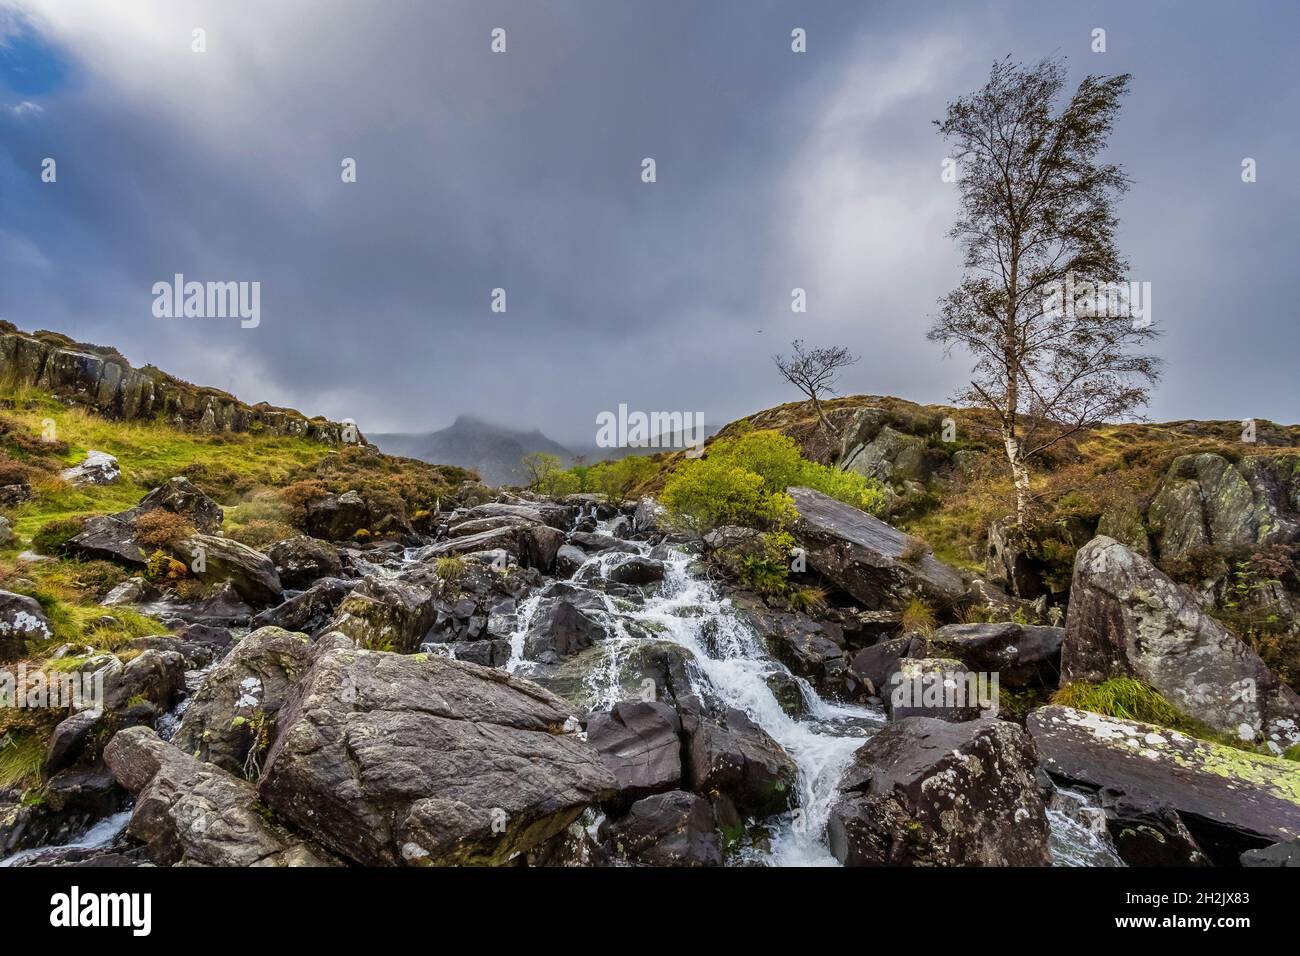 Waterfall in Snowdonia National Park, North Wales. Stock Photo